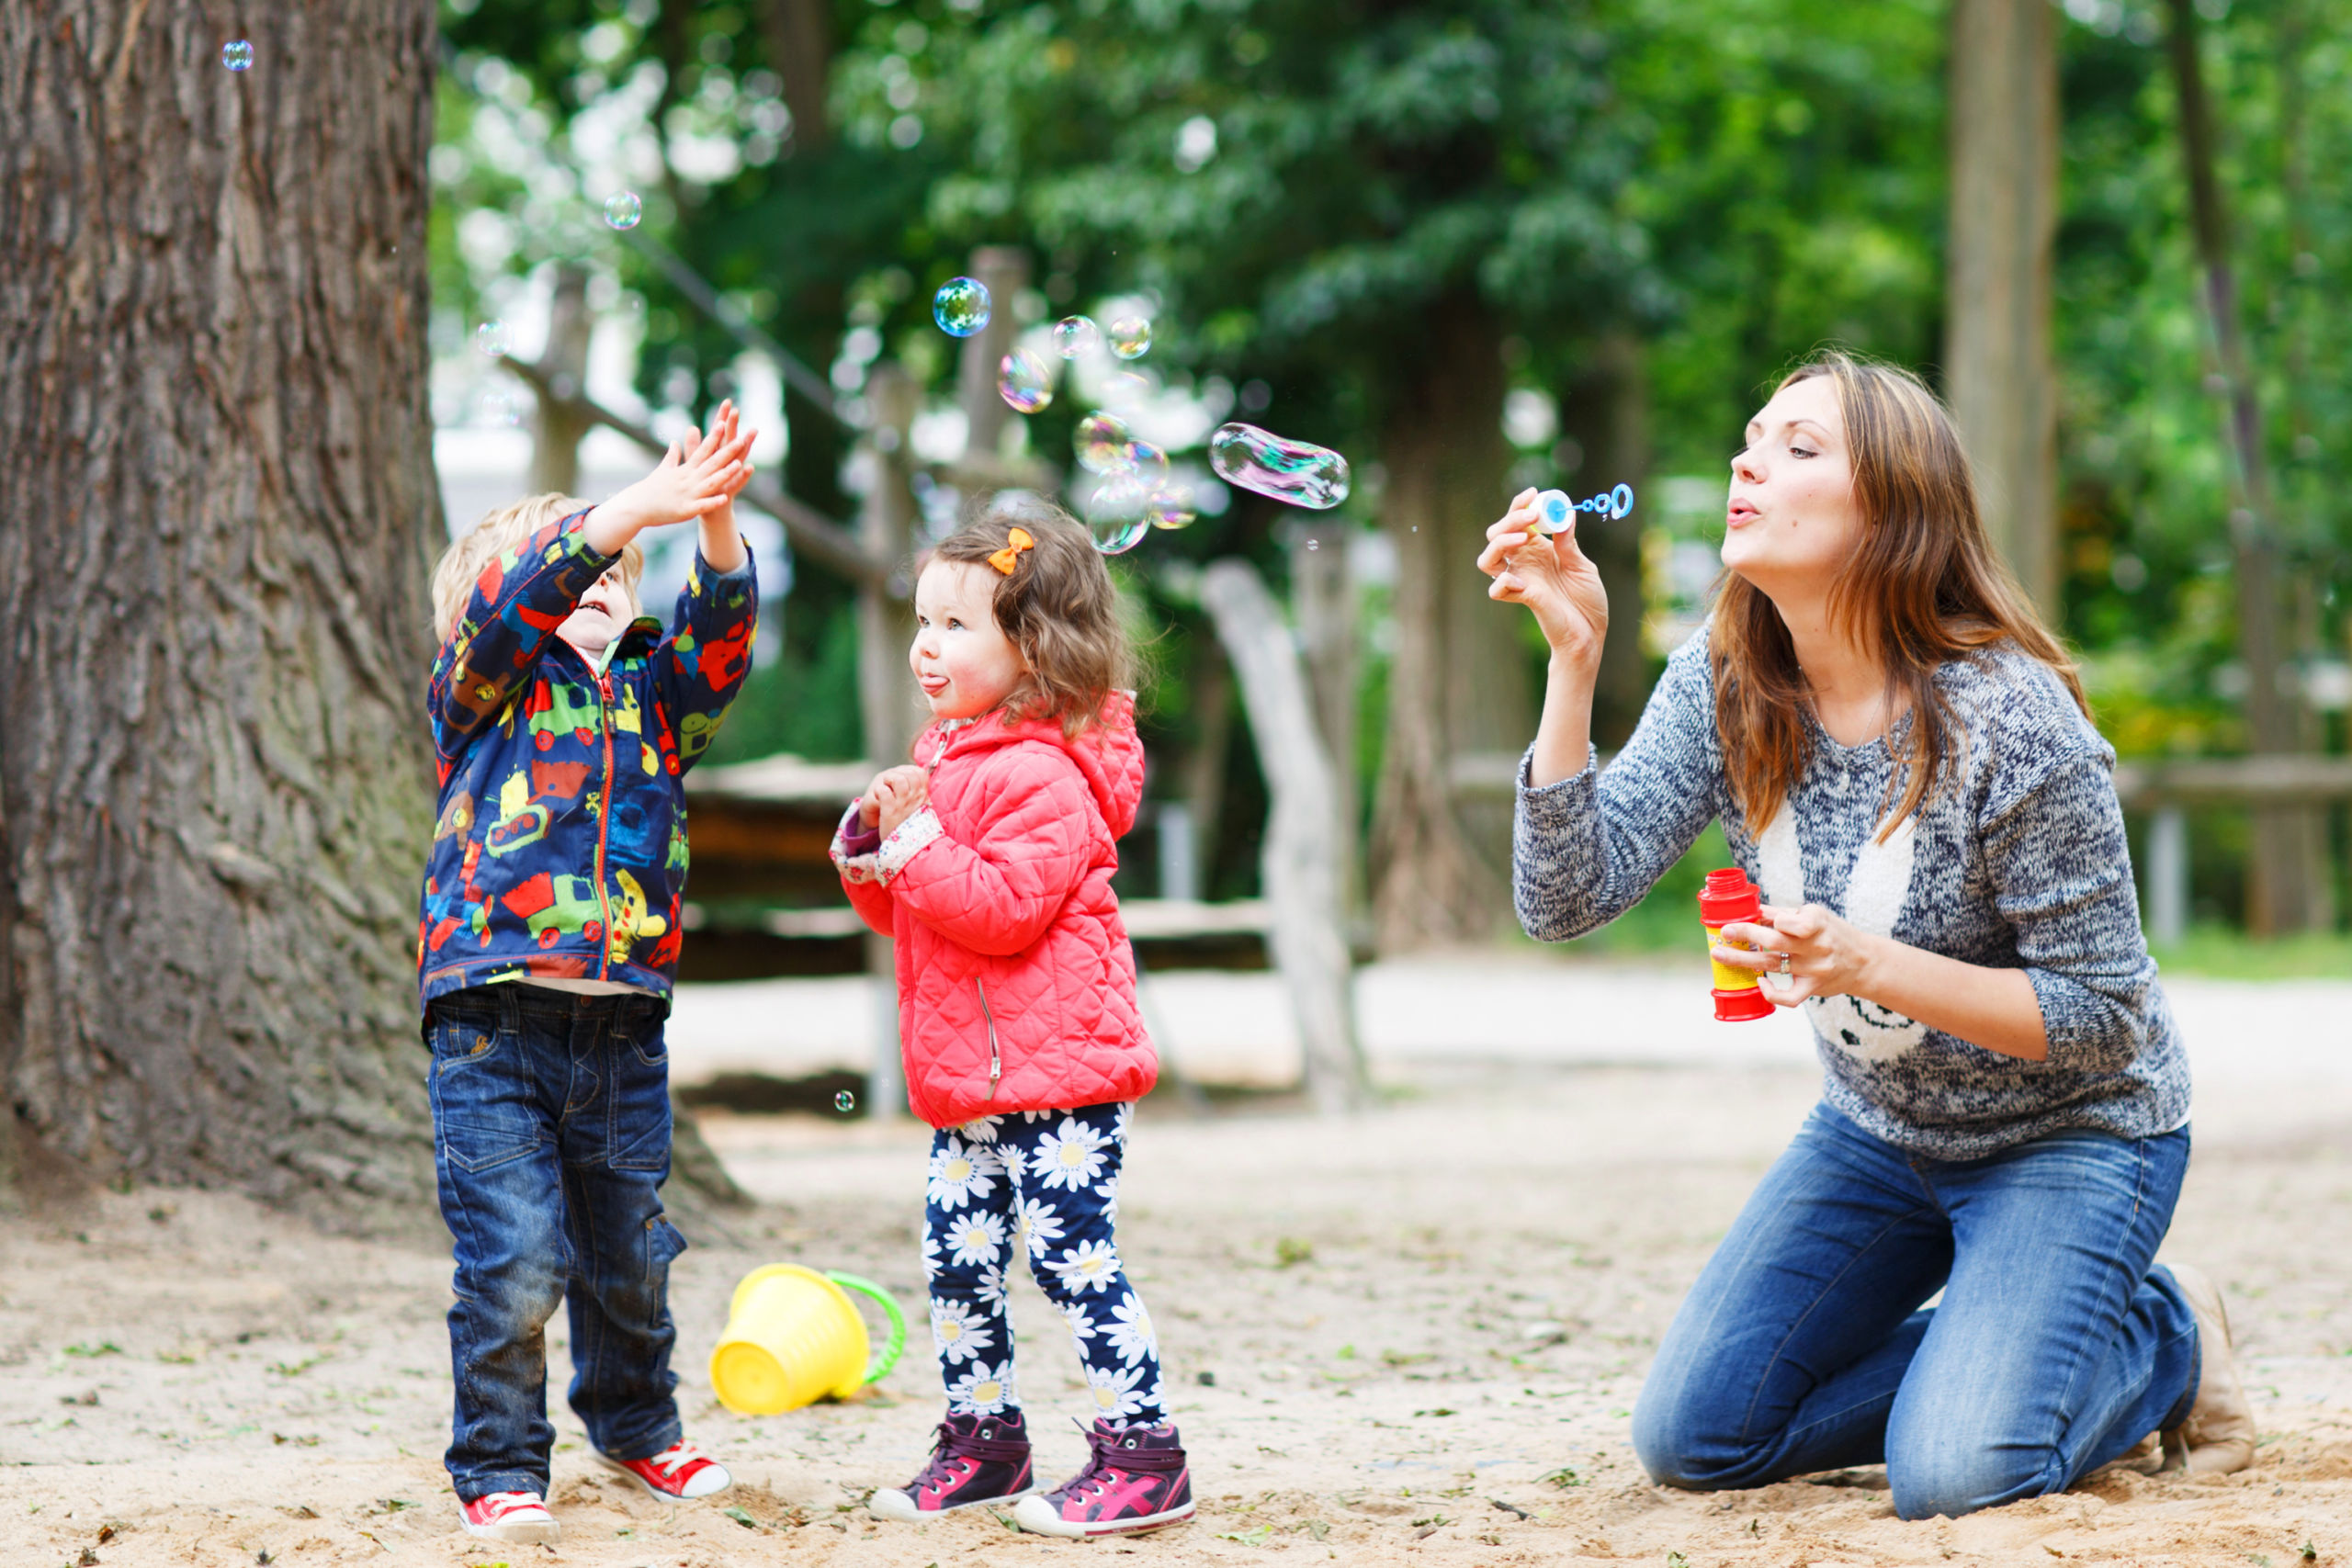 Mother blowing bubbles with children in park.